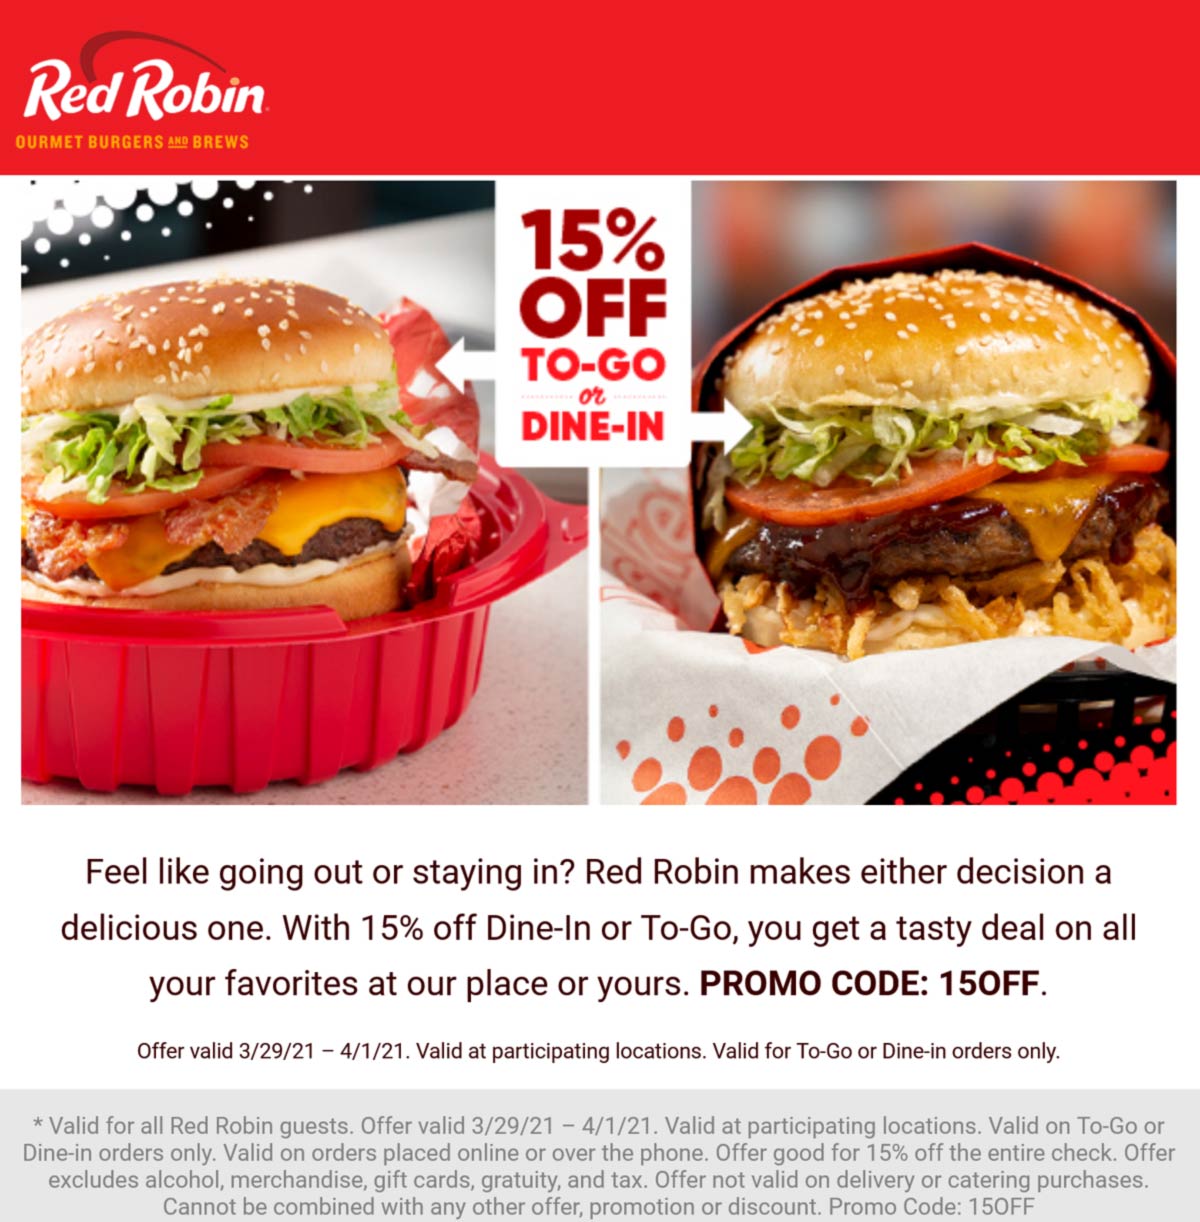 Red Robin restaurants Coupon  15% off today at Red Robin restaurants via promo code 15OFF #redrobin 